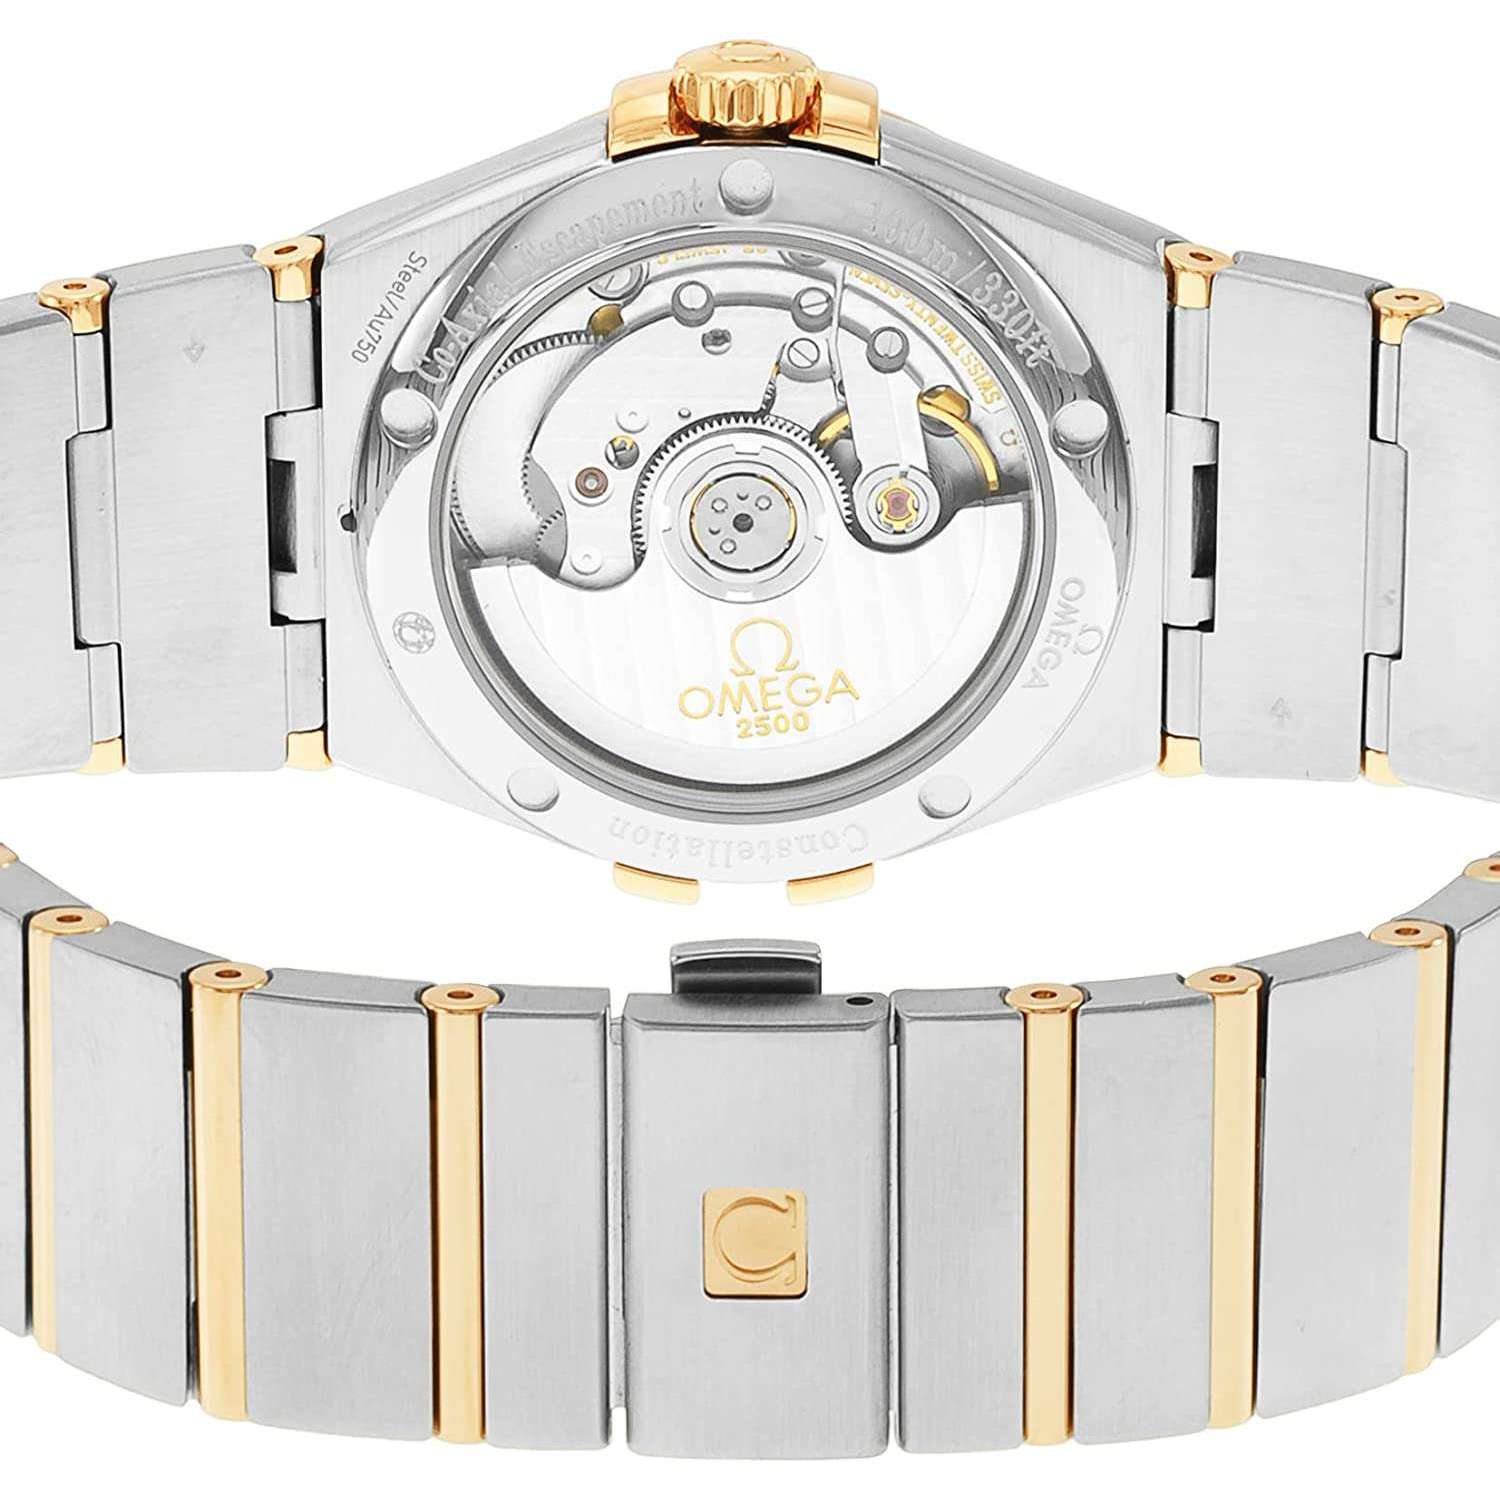 ROOK JAPAN:OMEGA CONSTELLATION CO-AXIAL CHRONOMETER 34 MM MEN WATCH 123.20.35.20.06.001,Luxury Watch,Omega